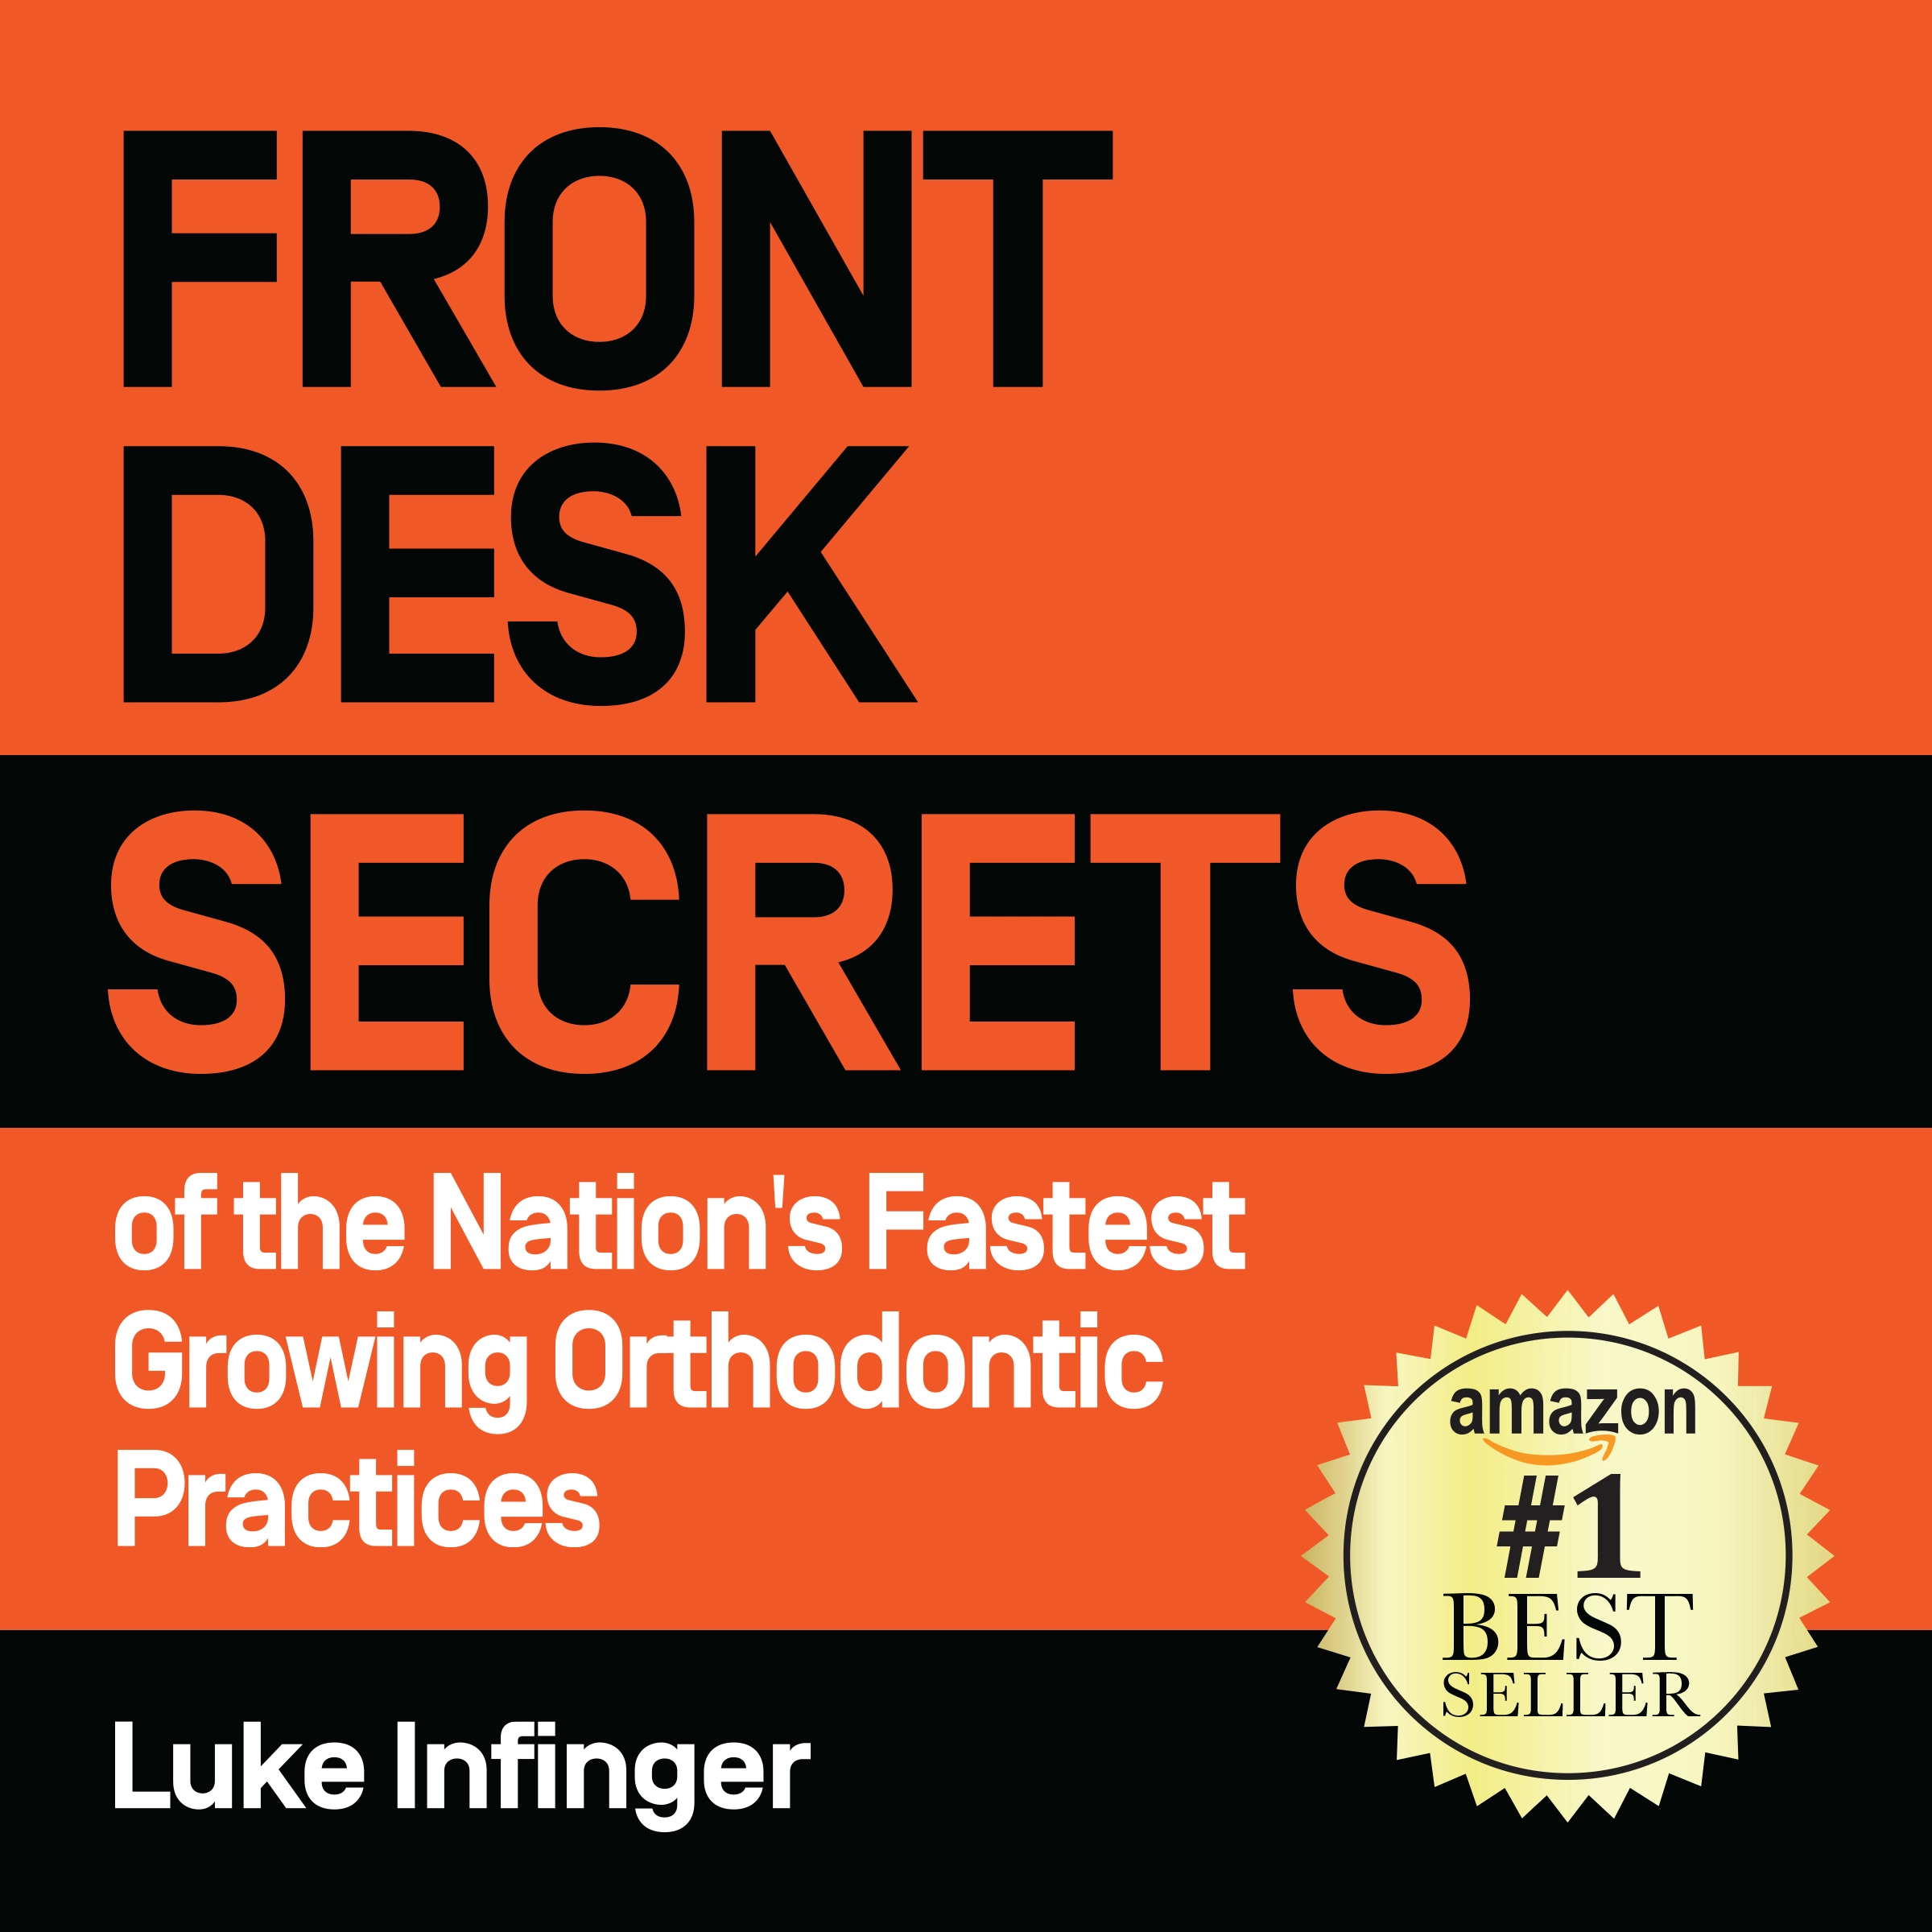 FRONT DESK SECRETS of the Nation's Fastest Growing Orthodontic Practices by Luke Infinger Audiobook